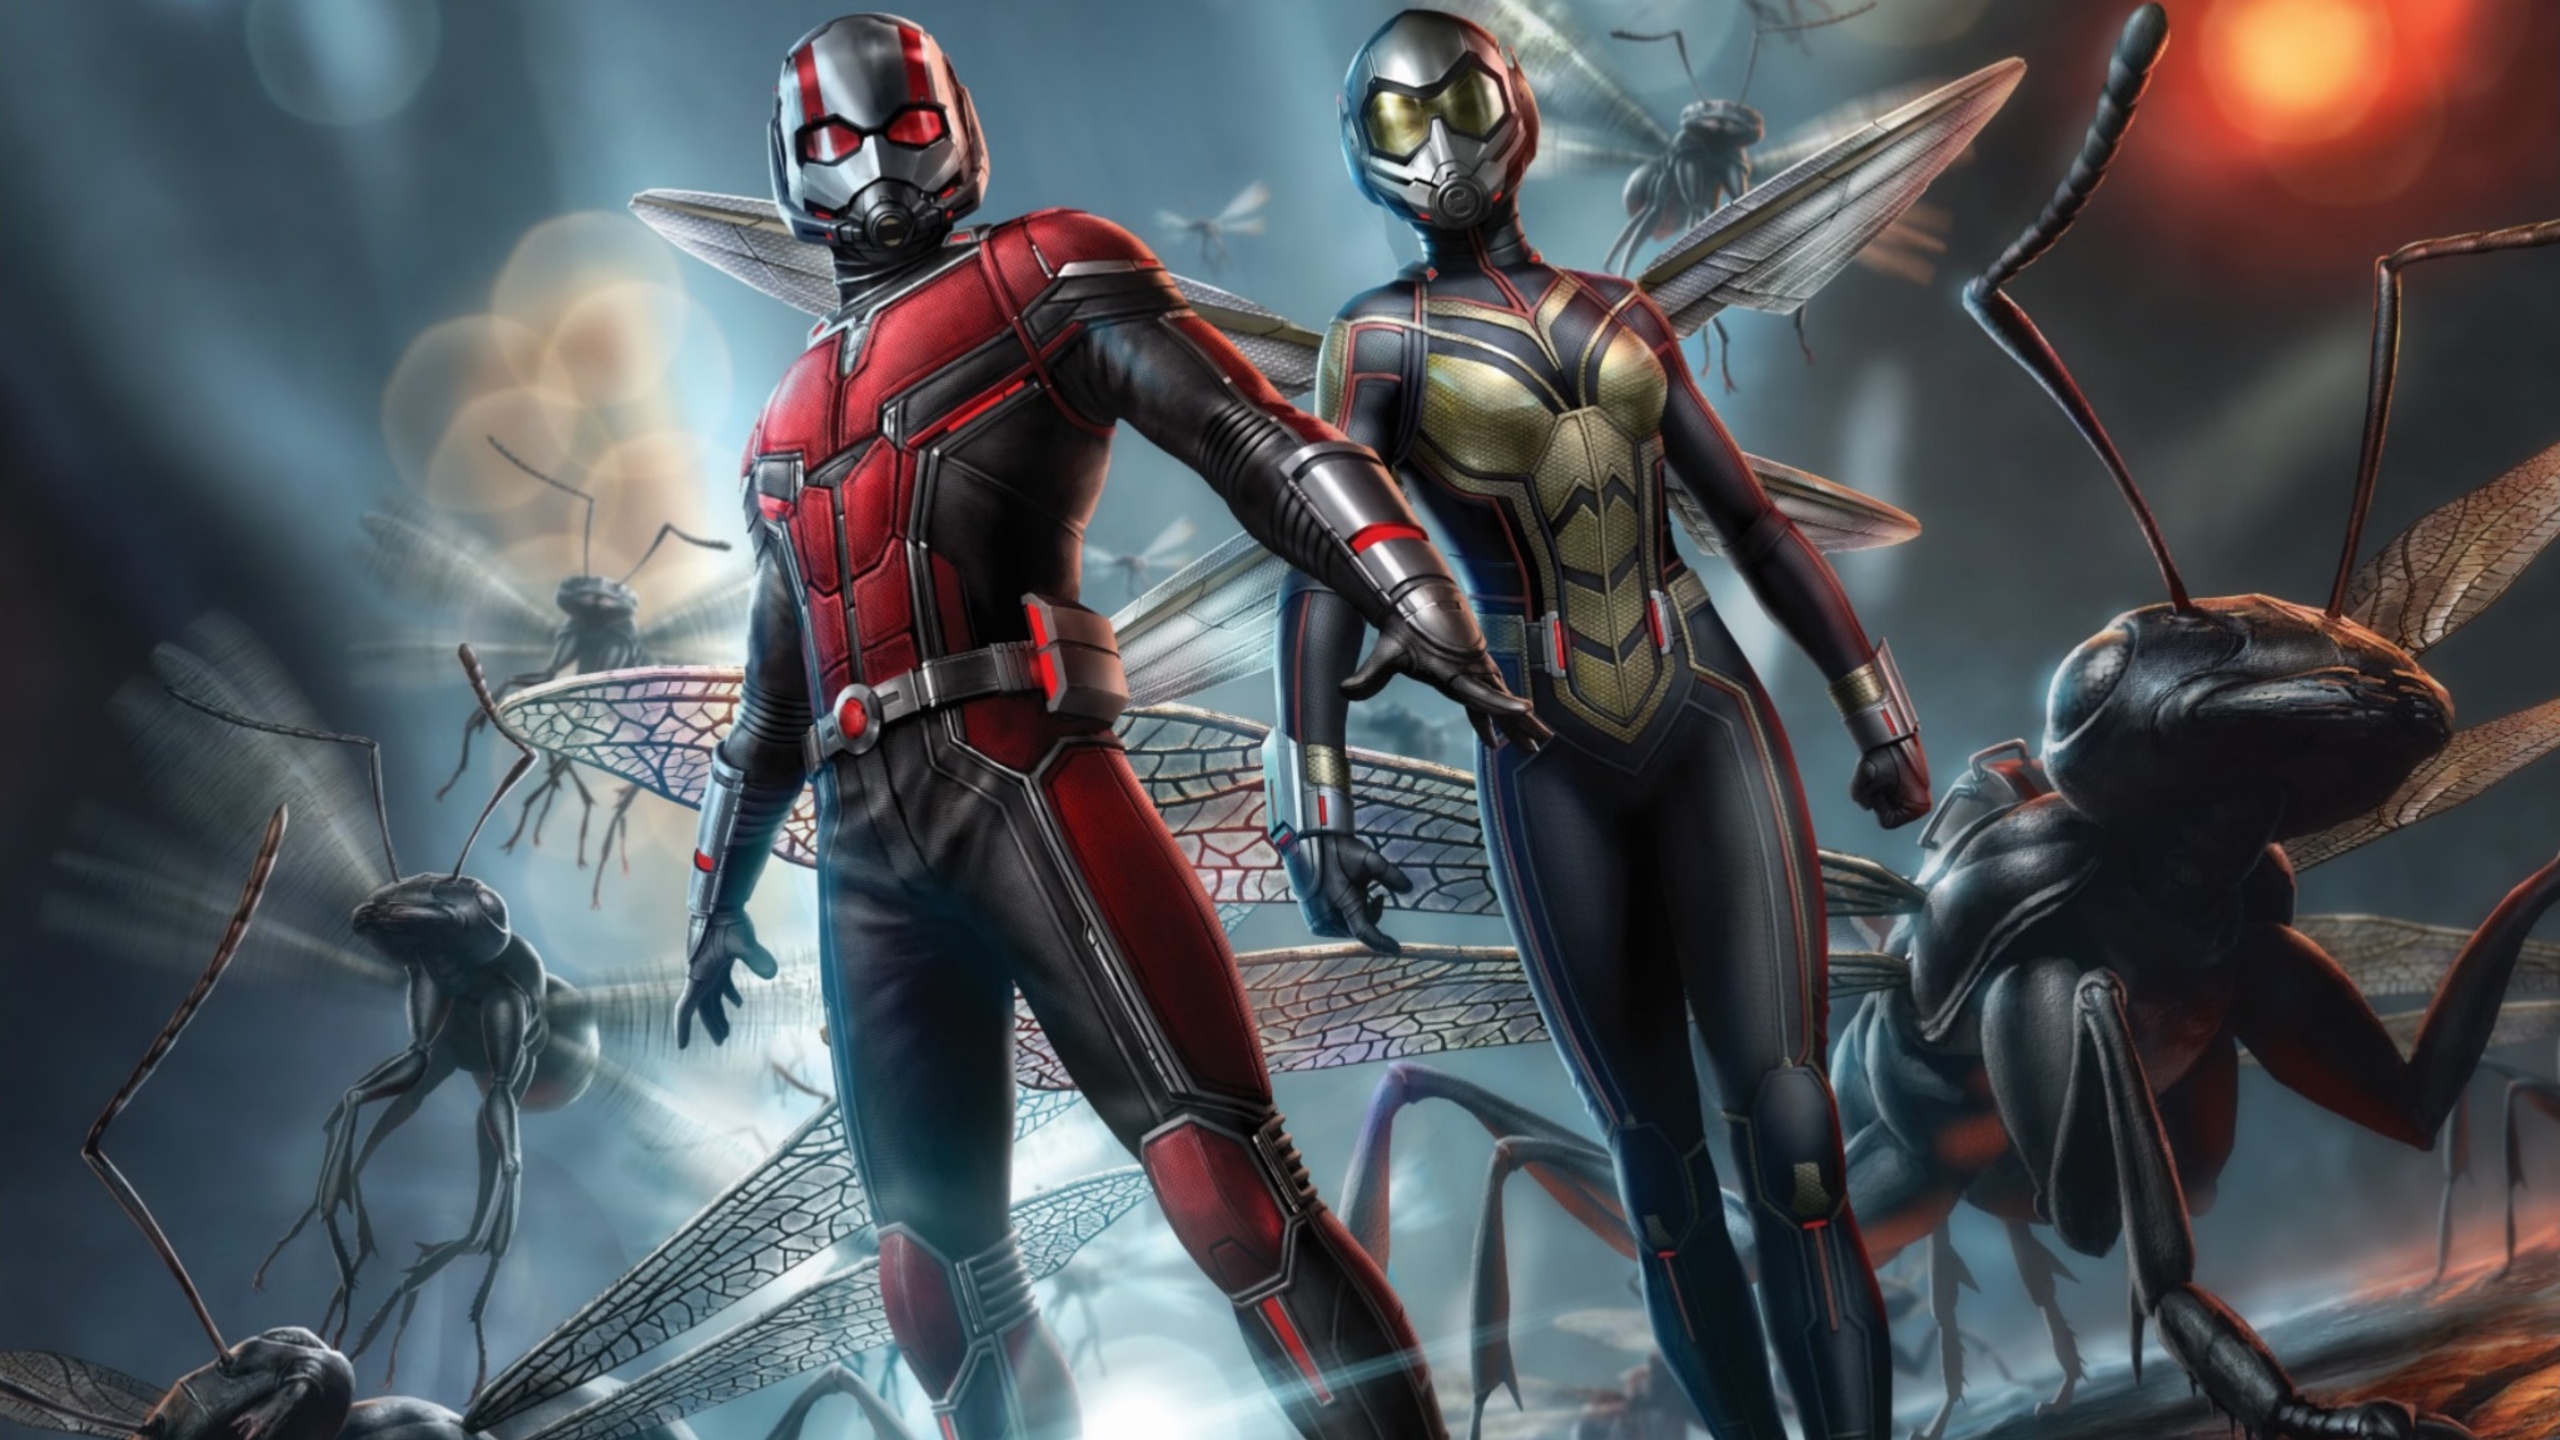 ant-man-and-the-wasp-promotional-poster-fx.jpg